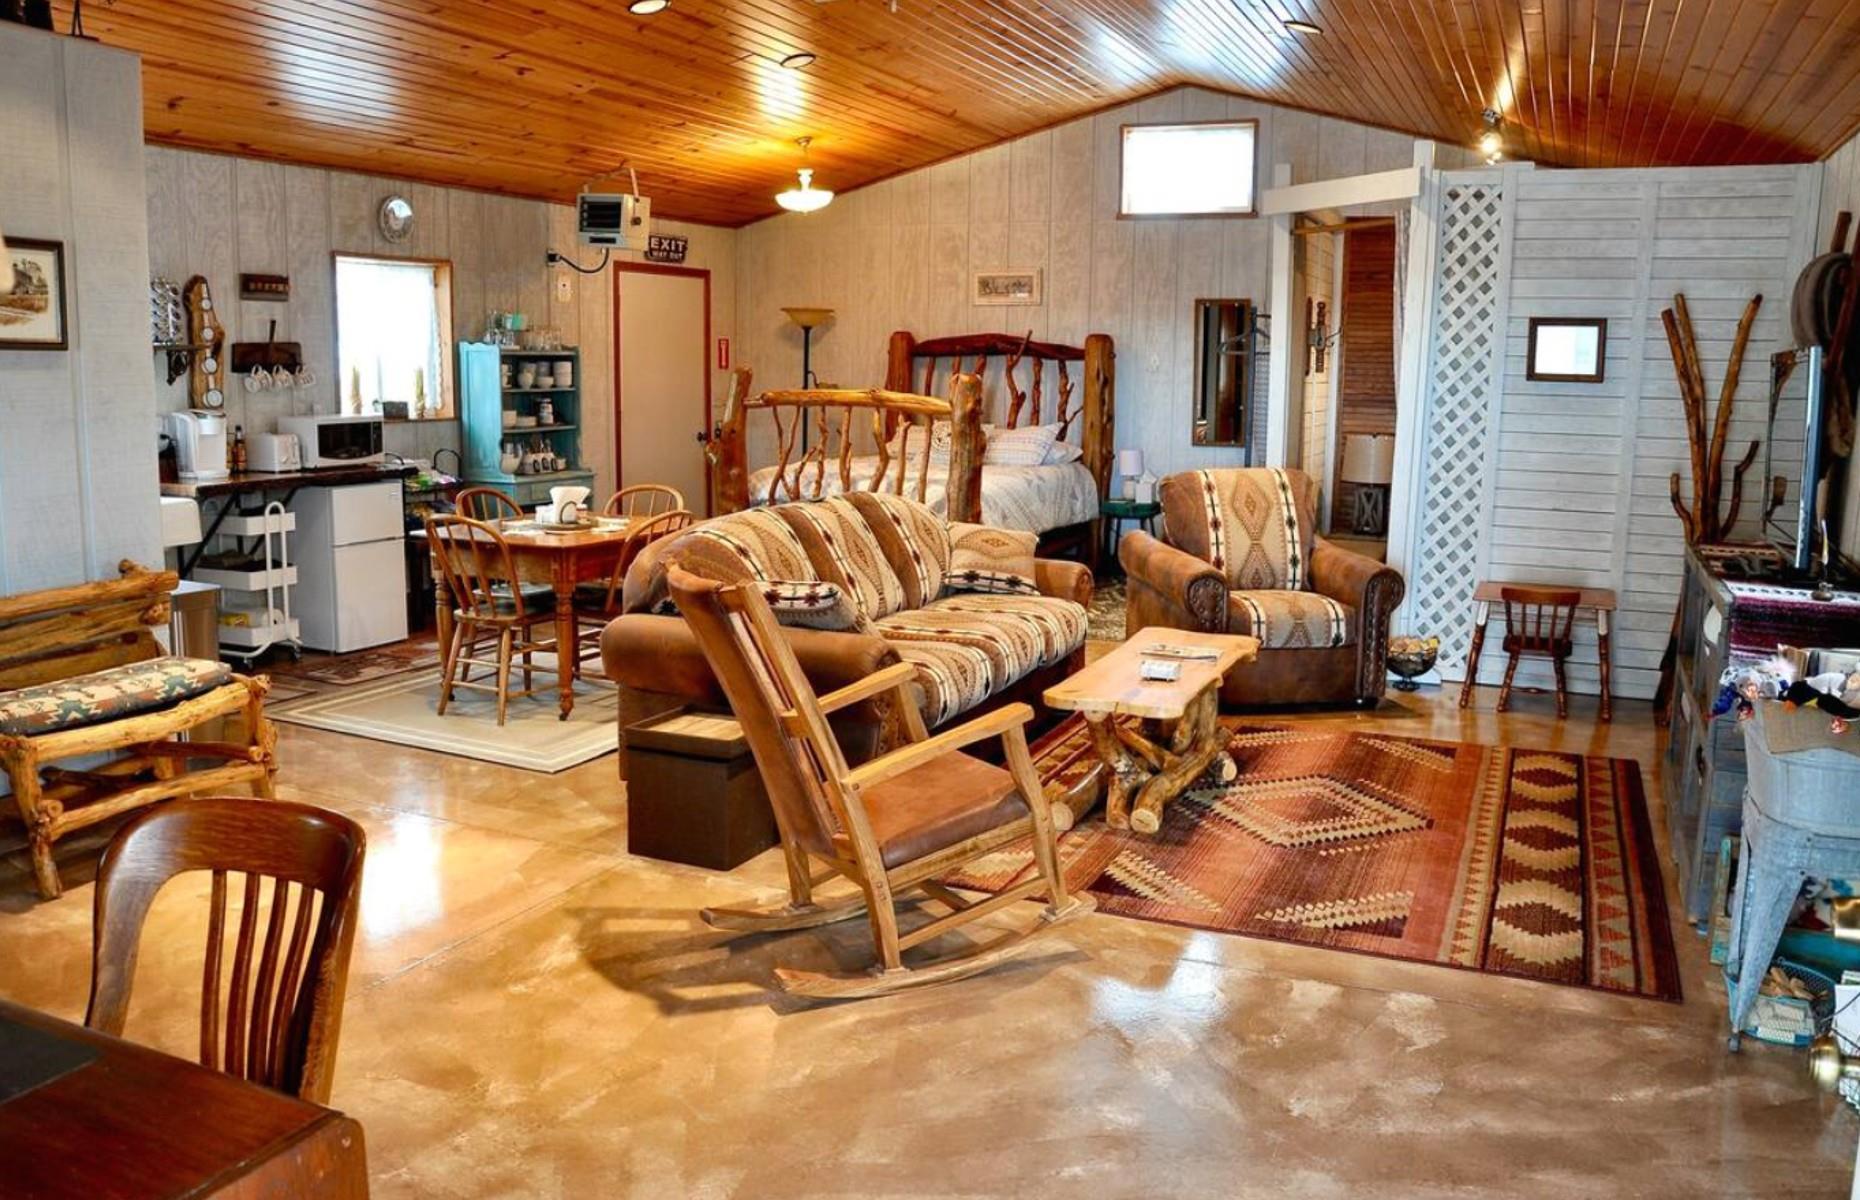 <p>To describe <a href="https://www.airbnb.co.uk/rooms/41129241">this guesthouse</a> as cozy would be something of an understatement. The open-plan space is all homely, rustic charm, from the squidgy leather seats and the handmade log bed to the front porch. It sleeps up to six people with a sofa bed and sleeping nook, so it’s one for a close family or group of friends and would equally make a perfect base for a couple. The home, which is close to the Black Hills and attractions including Mount Rushmore, is on Airbnb for around $95 a night.</p>